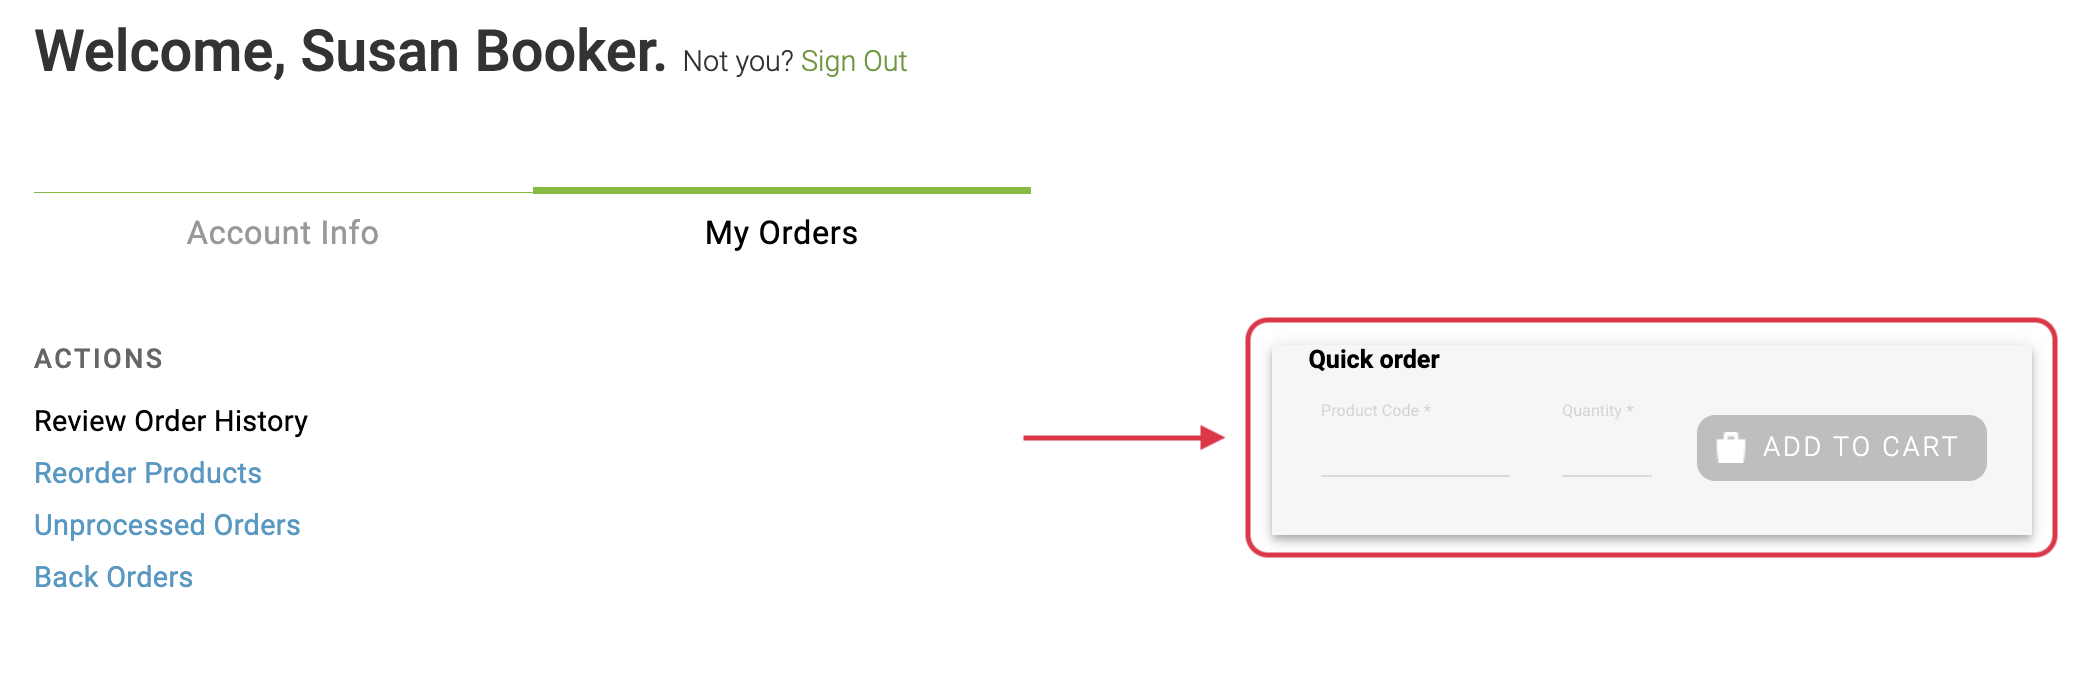 Searching for a product using the Quick order tool.